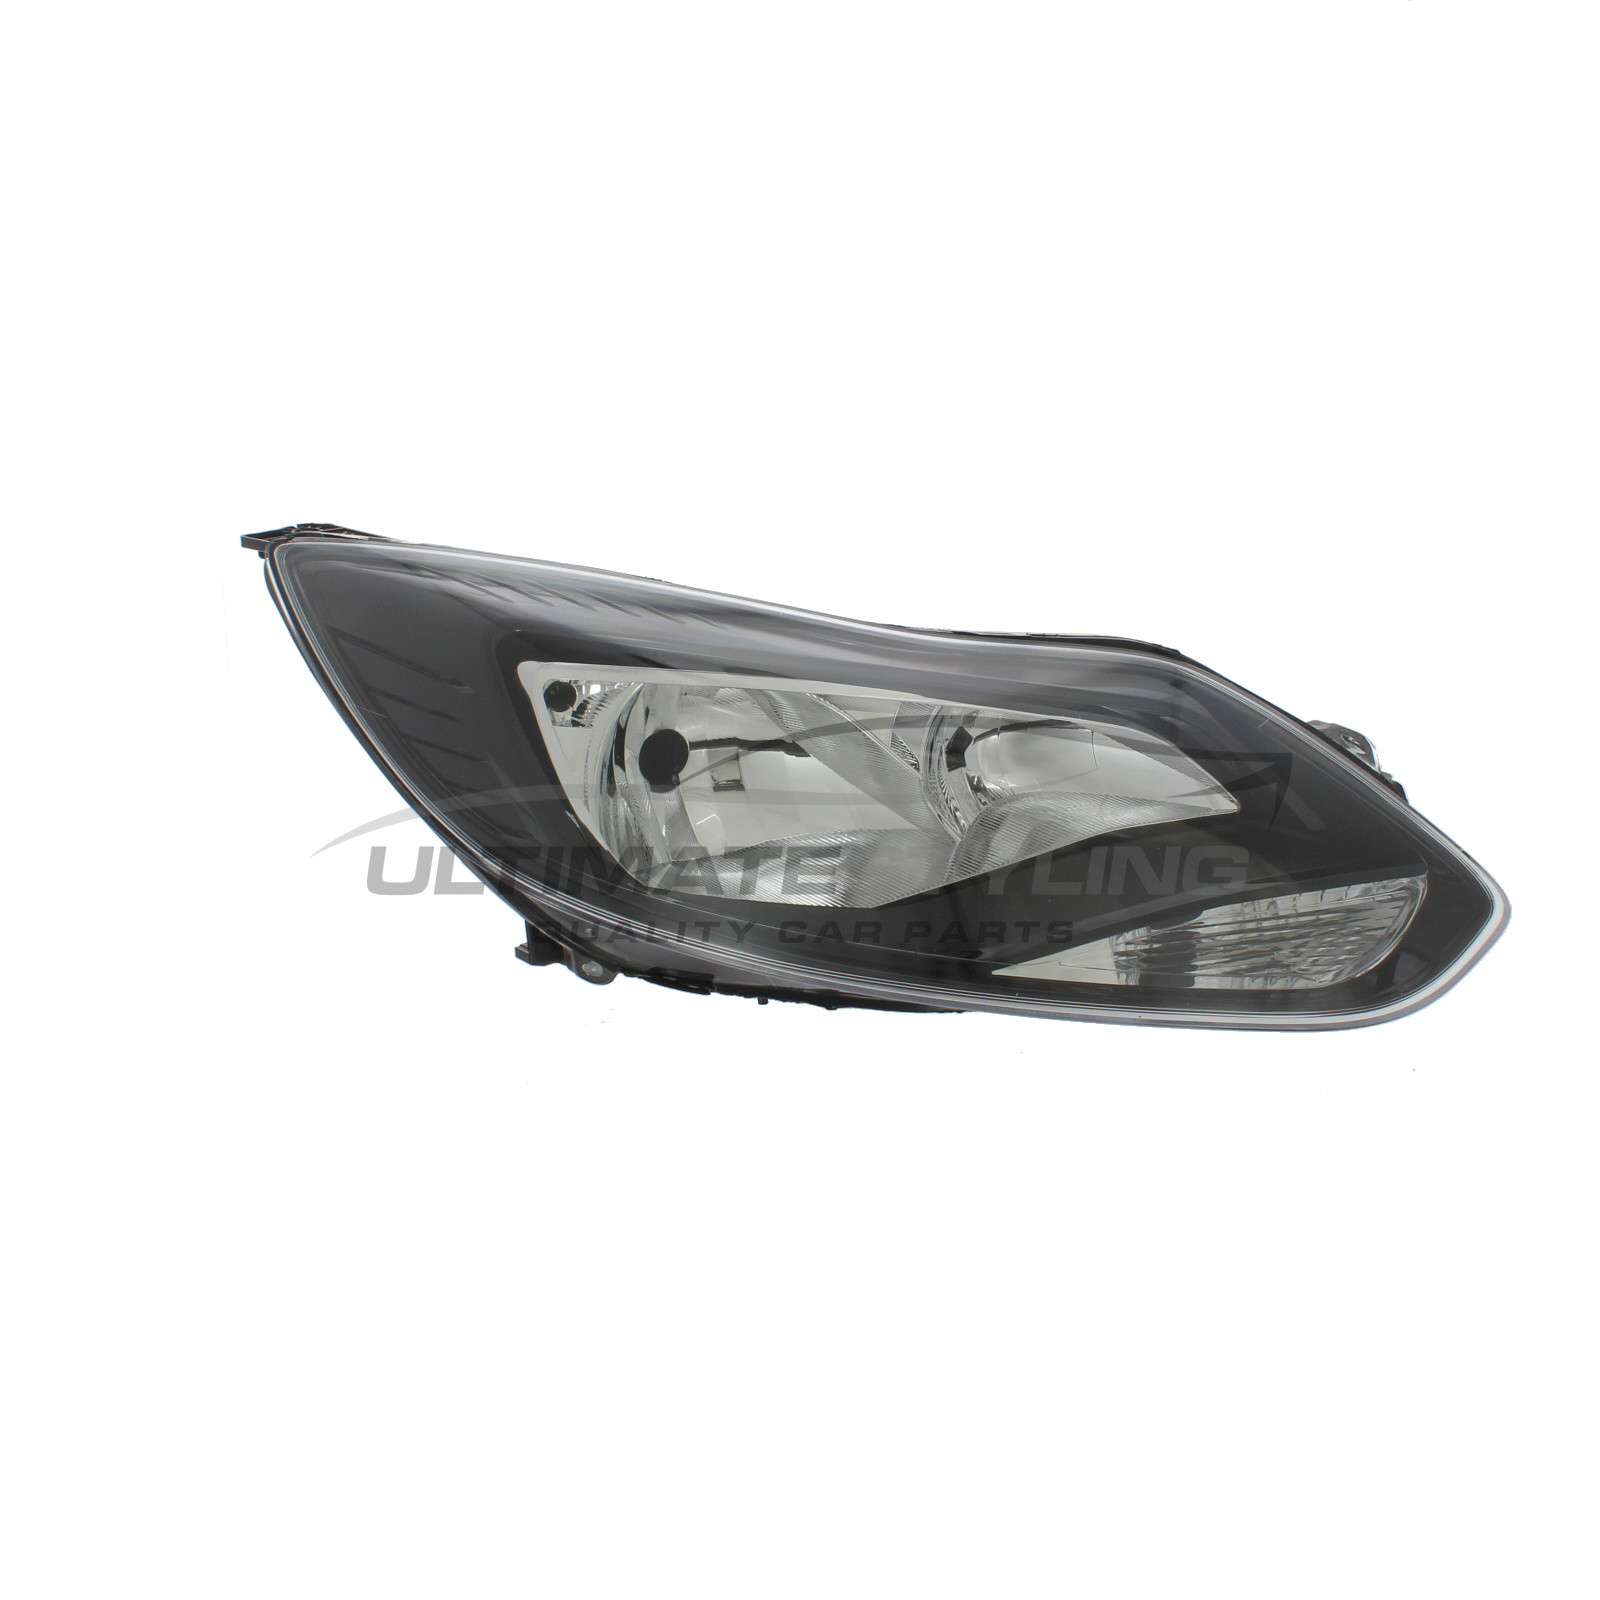 Ford Focus 2011-2014 Halogen, Electric With Motor, Headlight / Headlamp with Black Surround Drivers Side (RH)